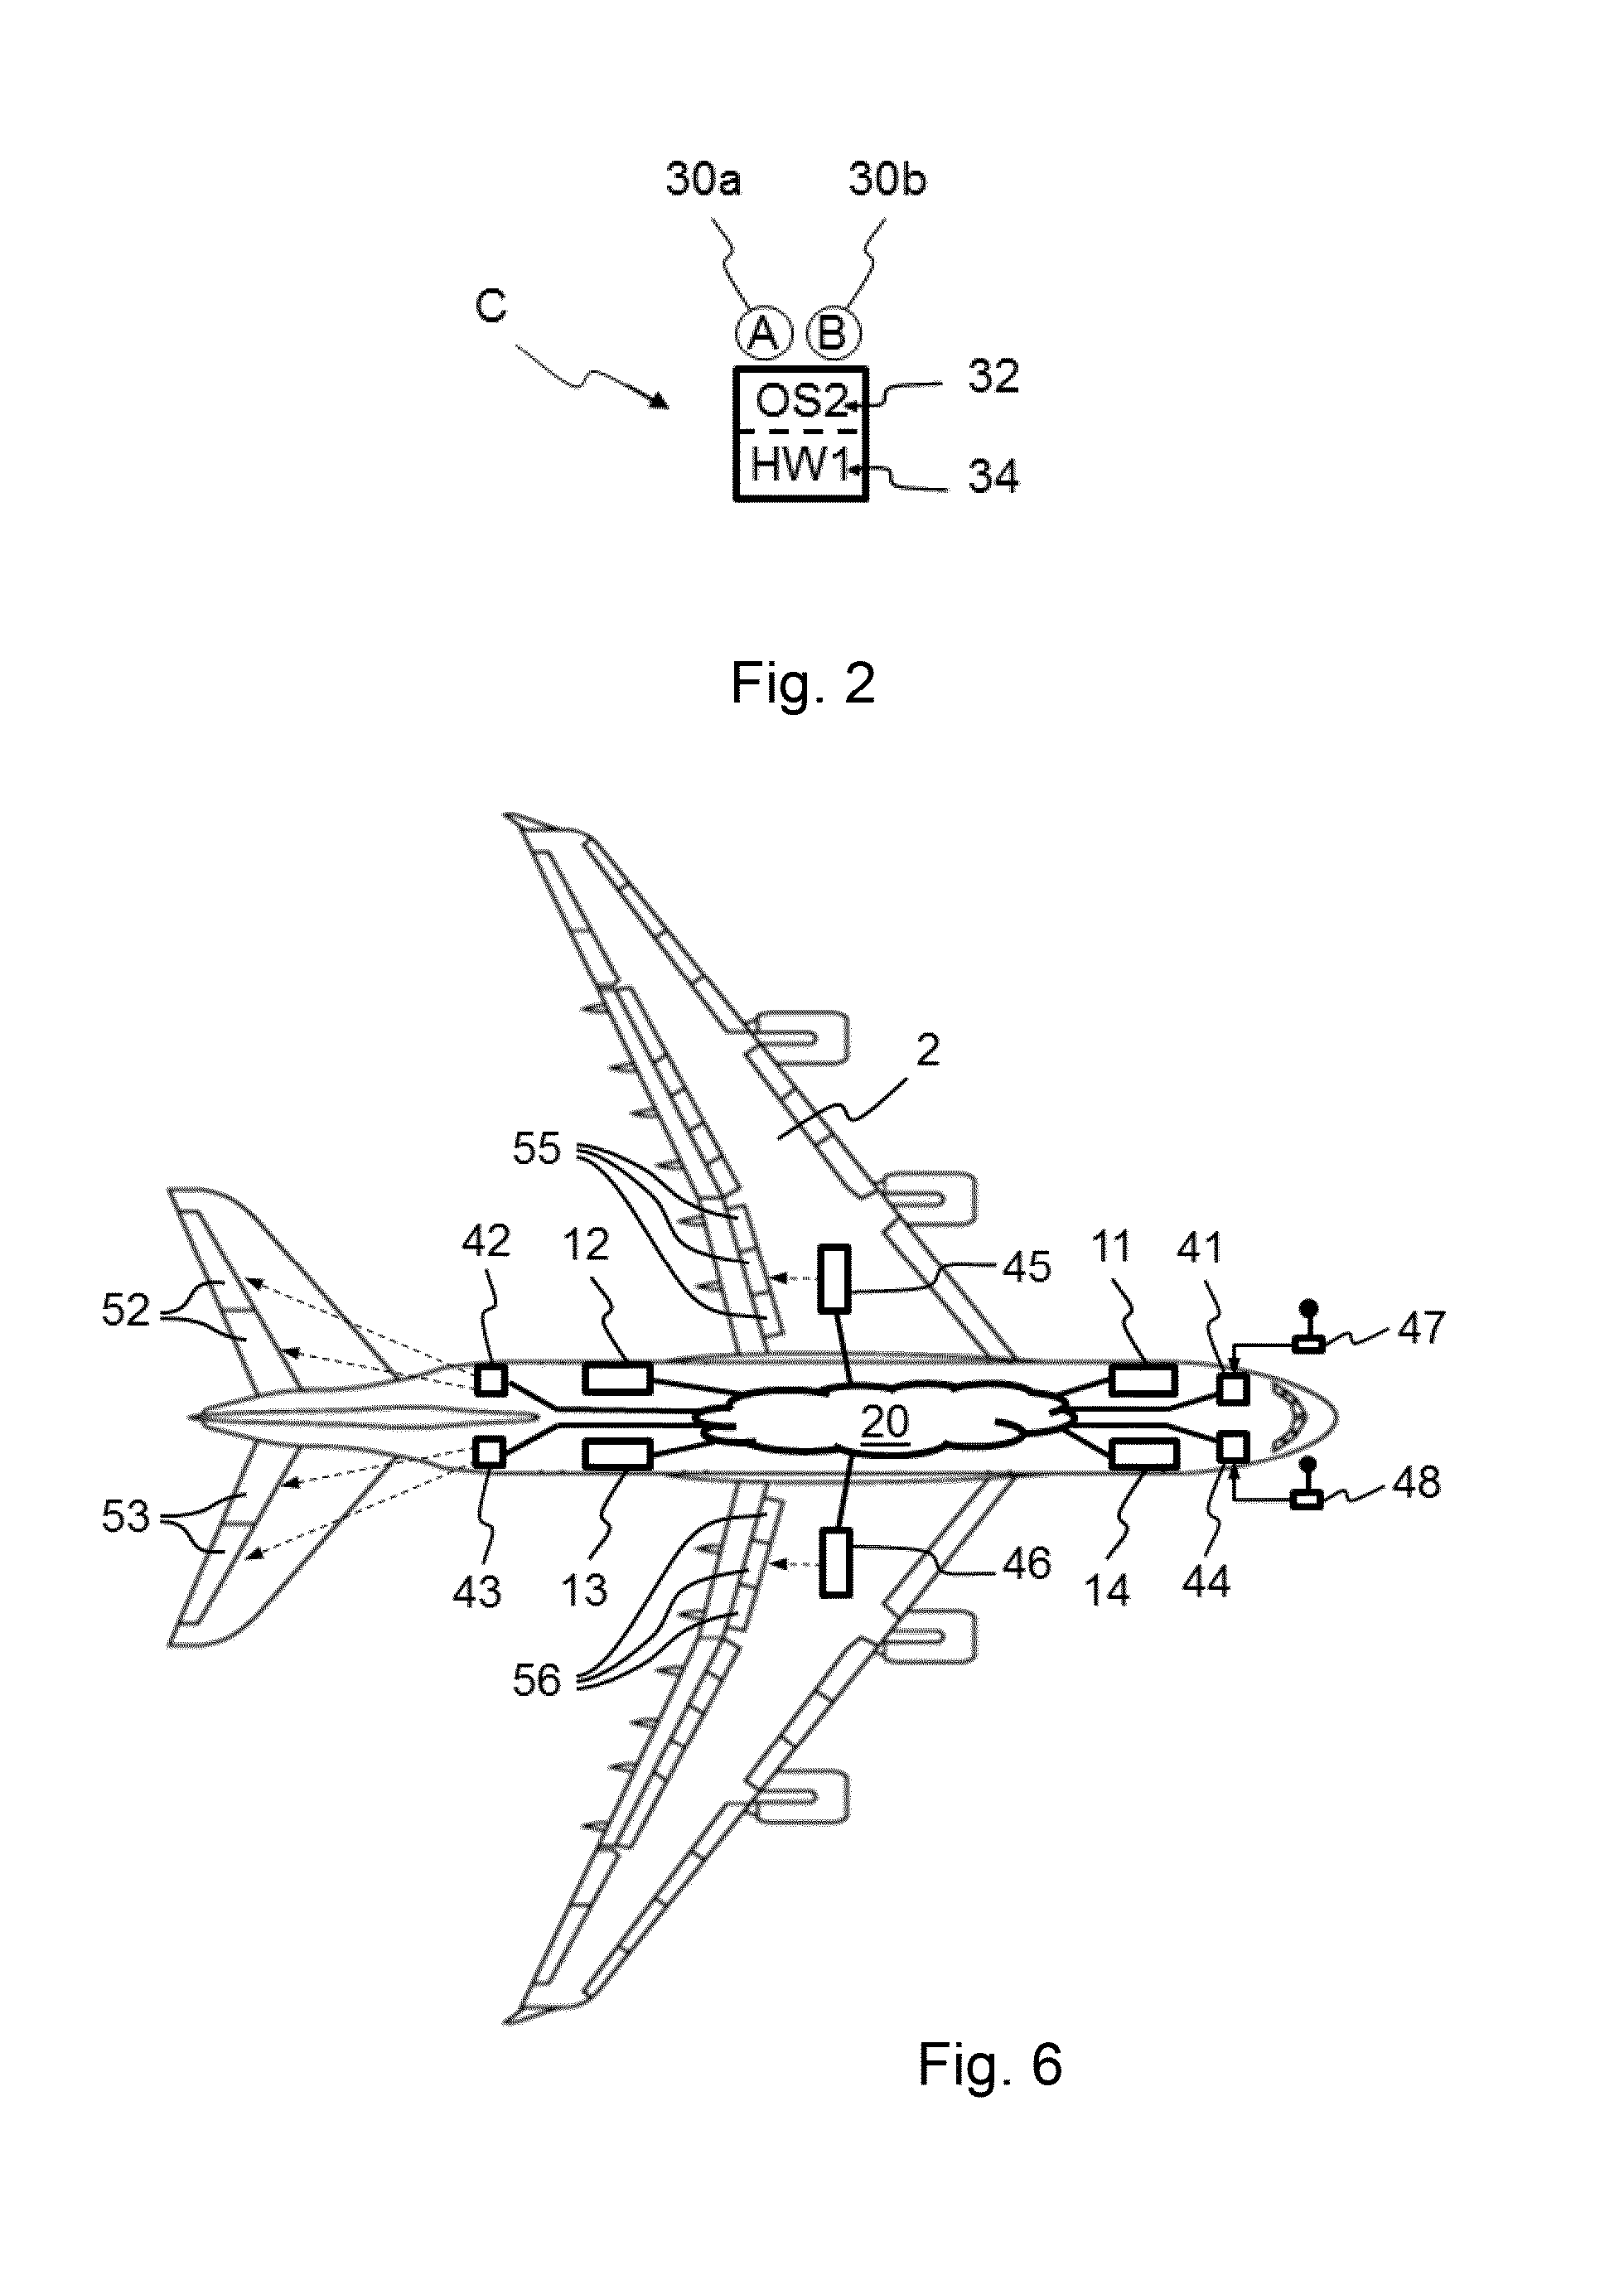 Control system for an aircraft